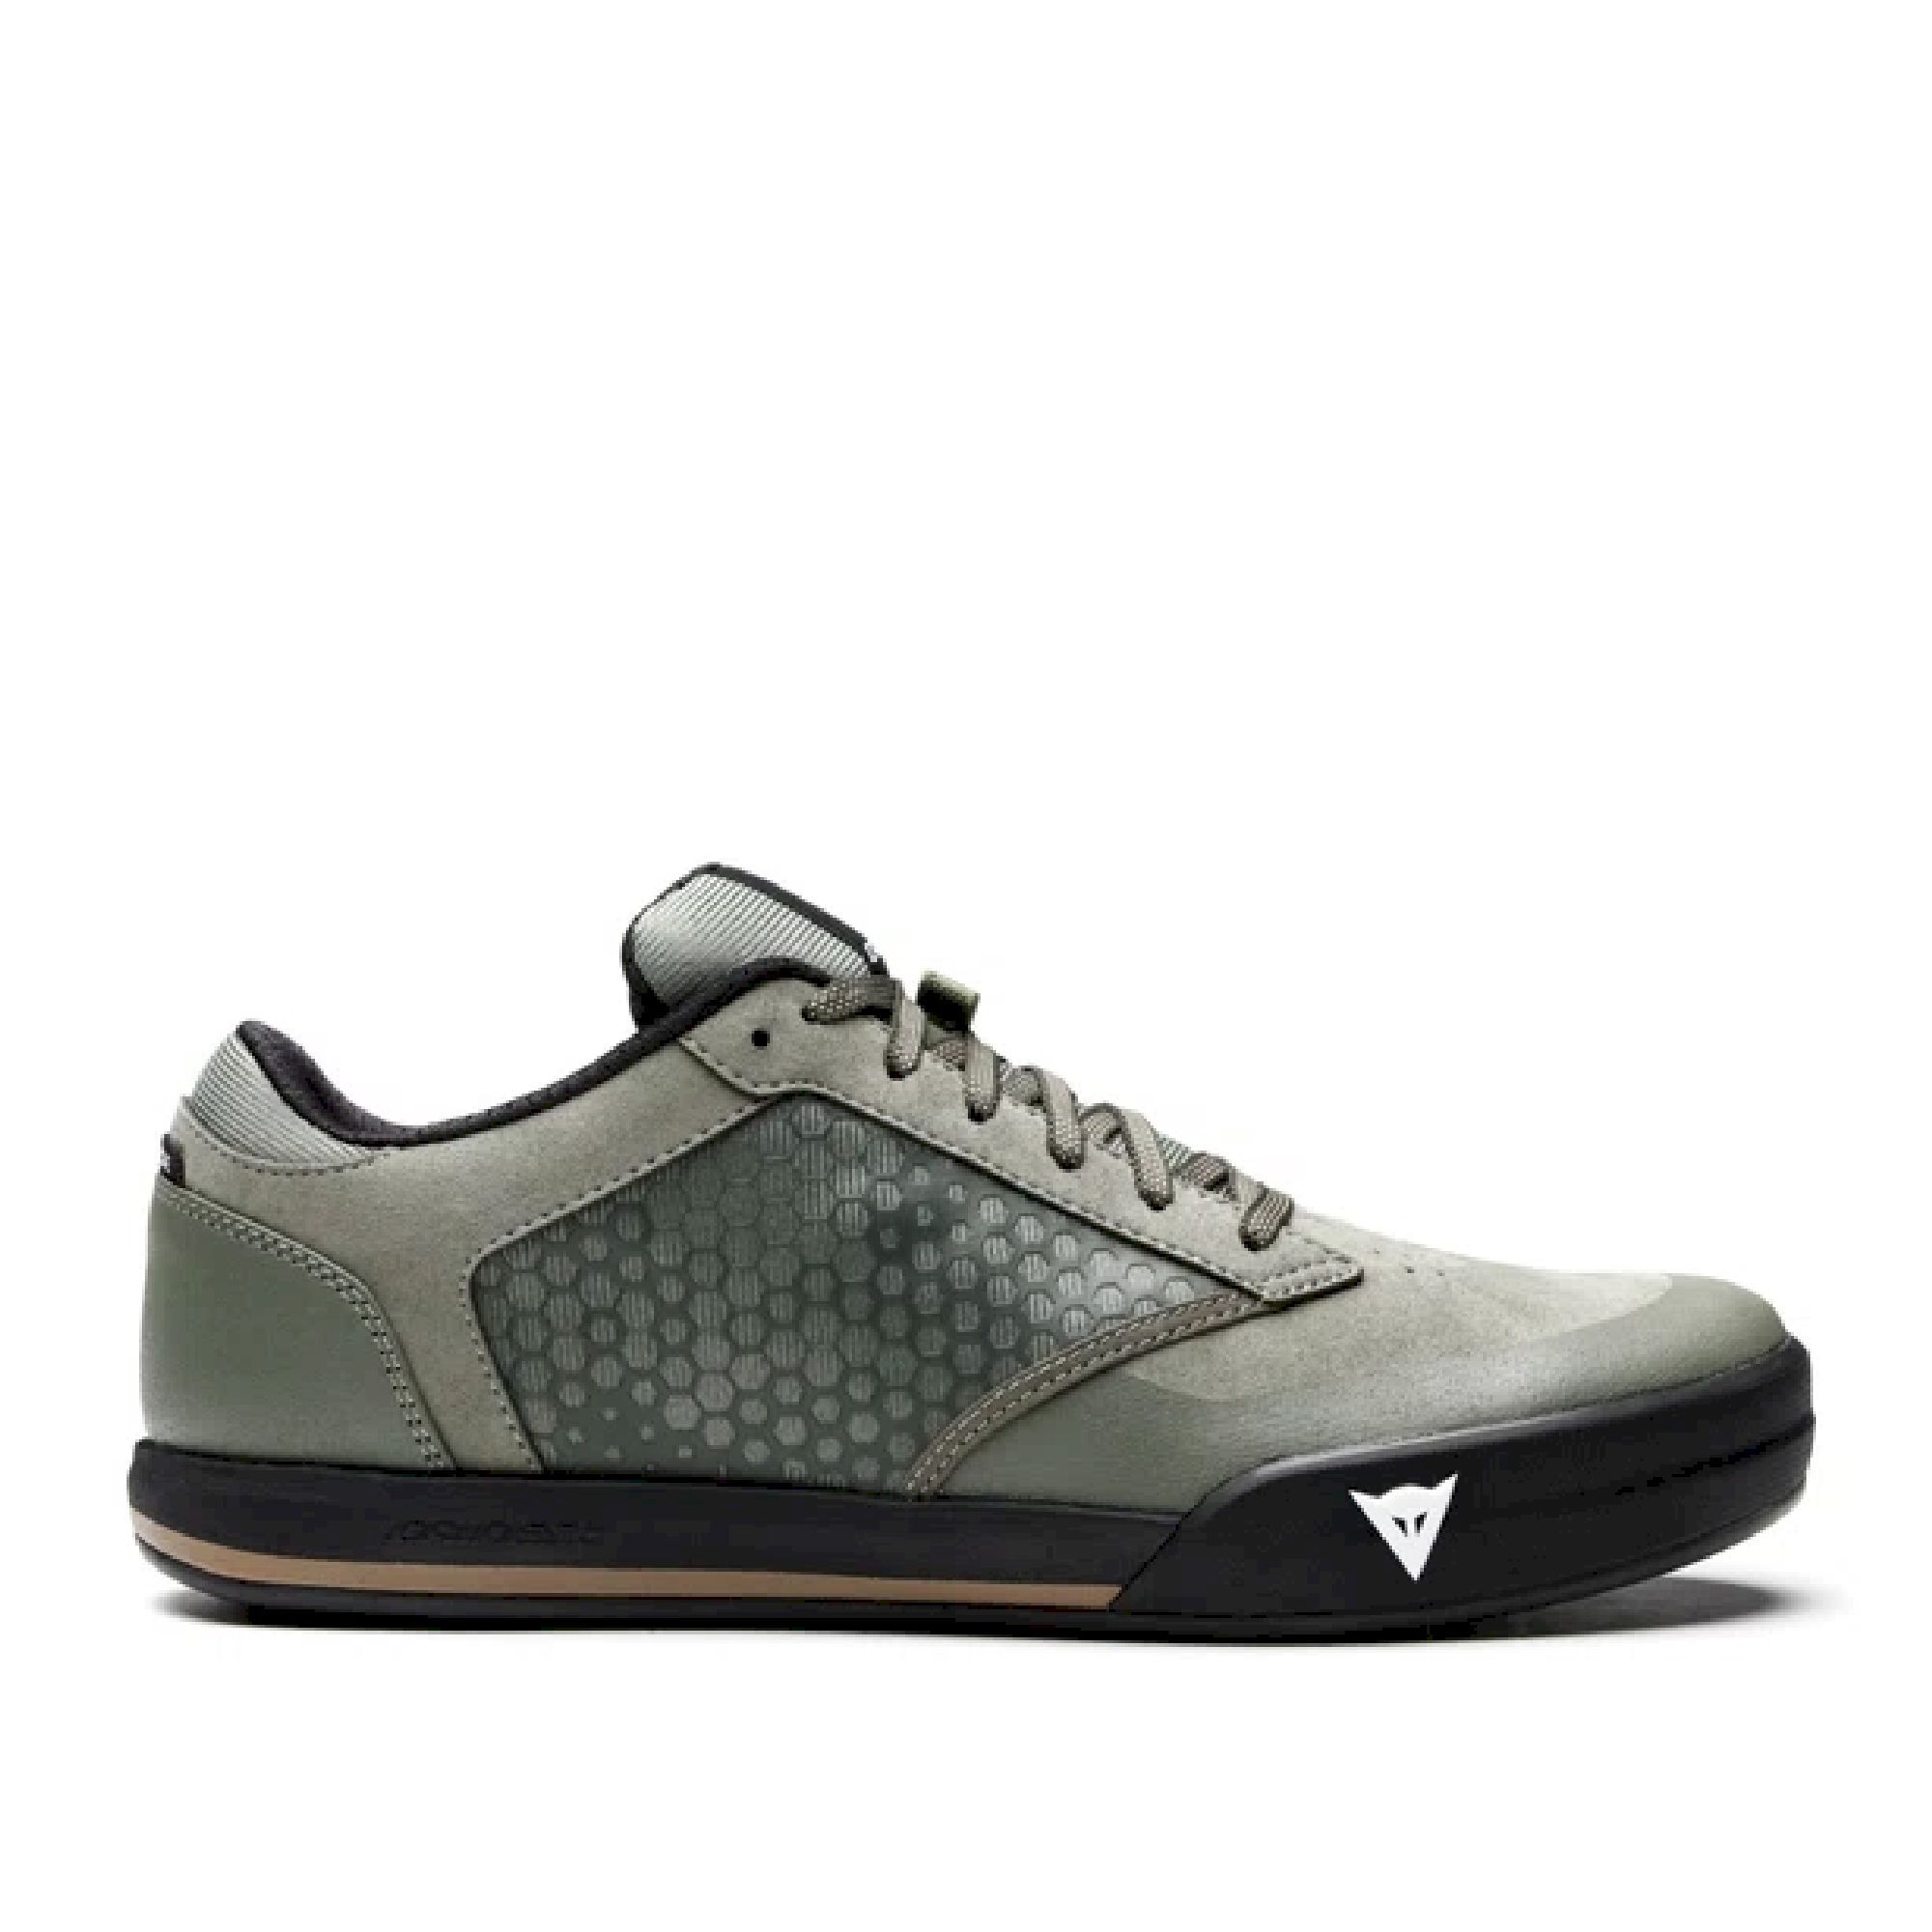 Dainese HG Acto - Mountain Bike shoes | Hardloop